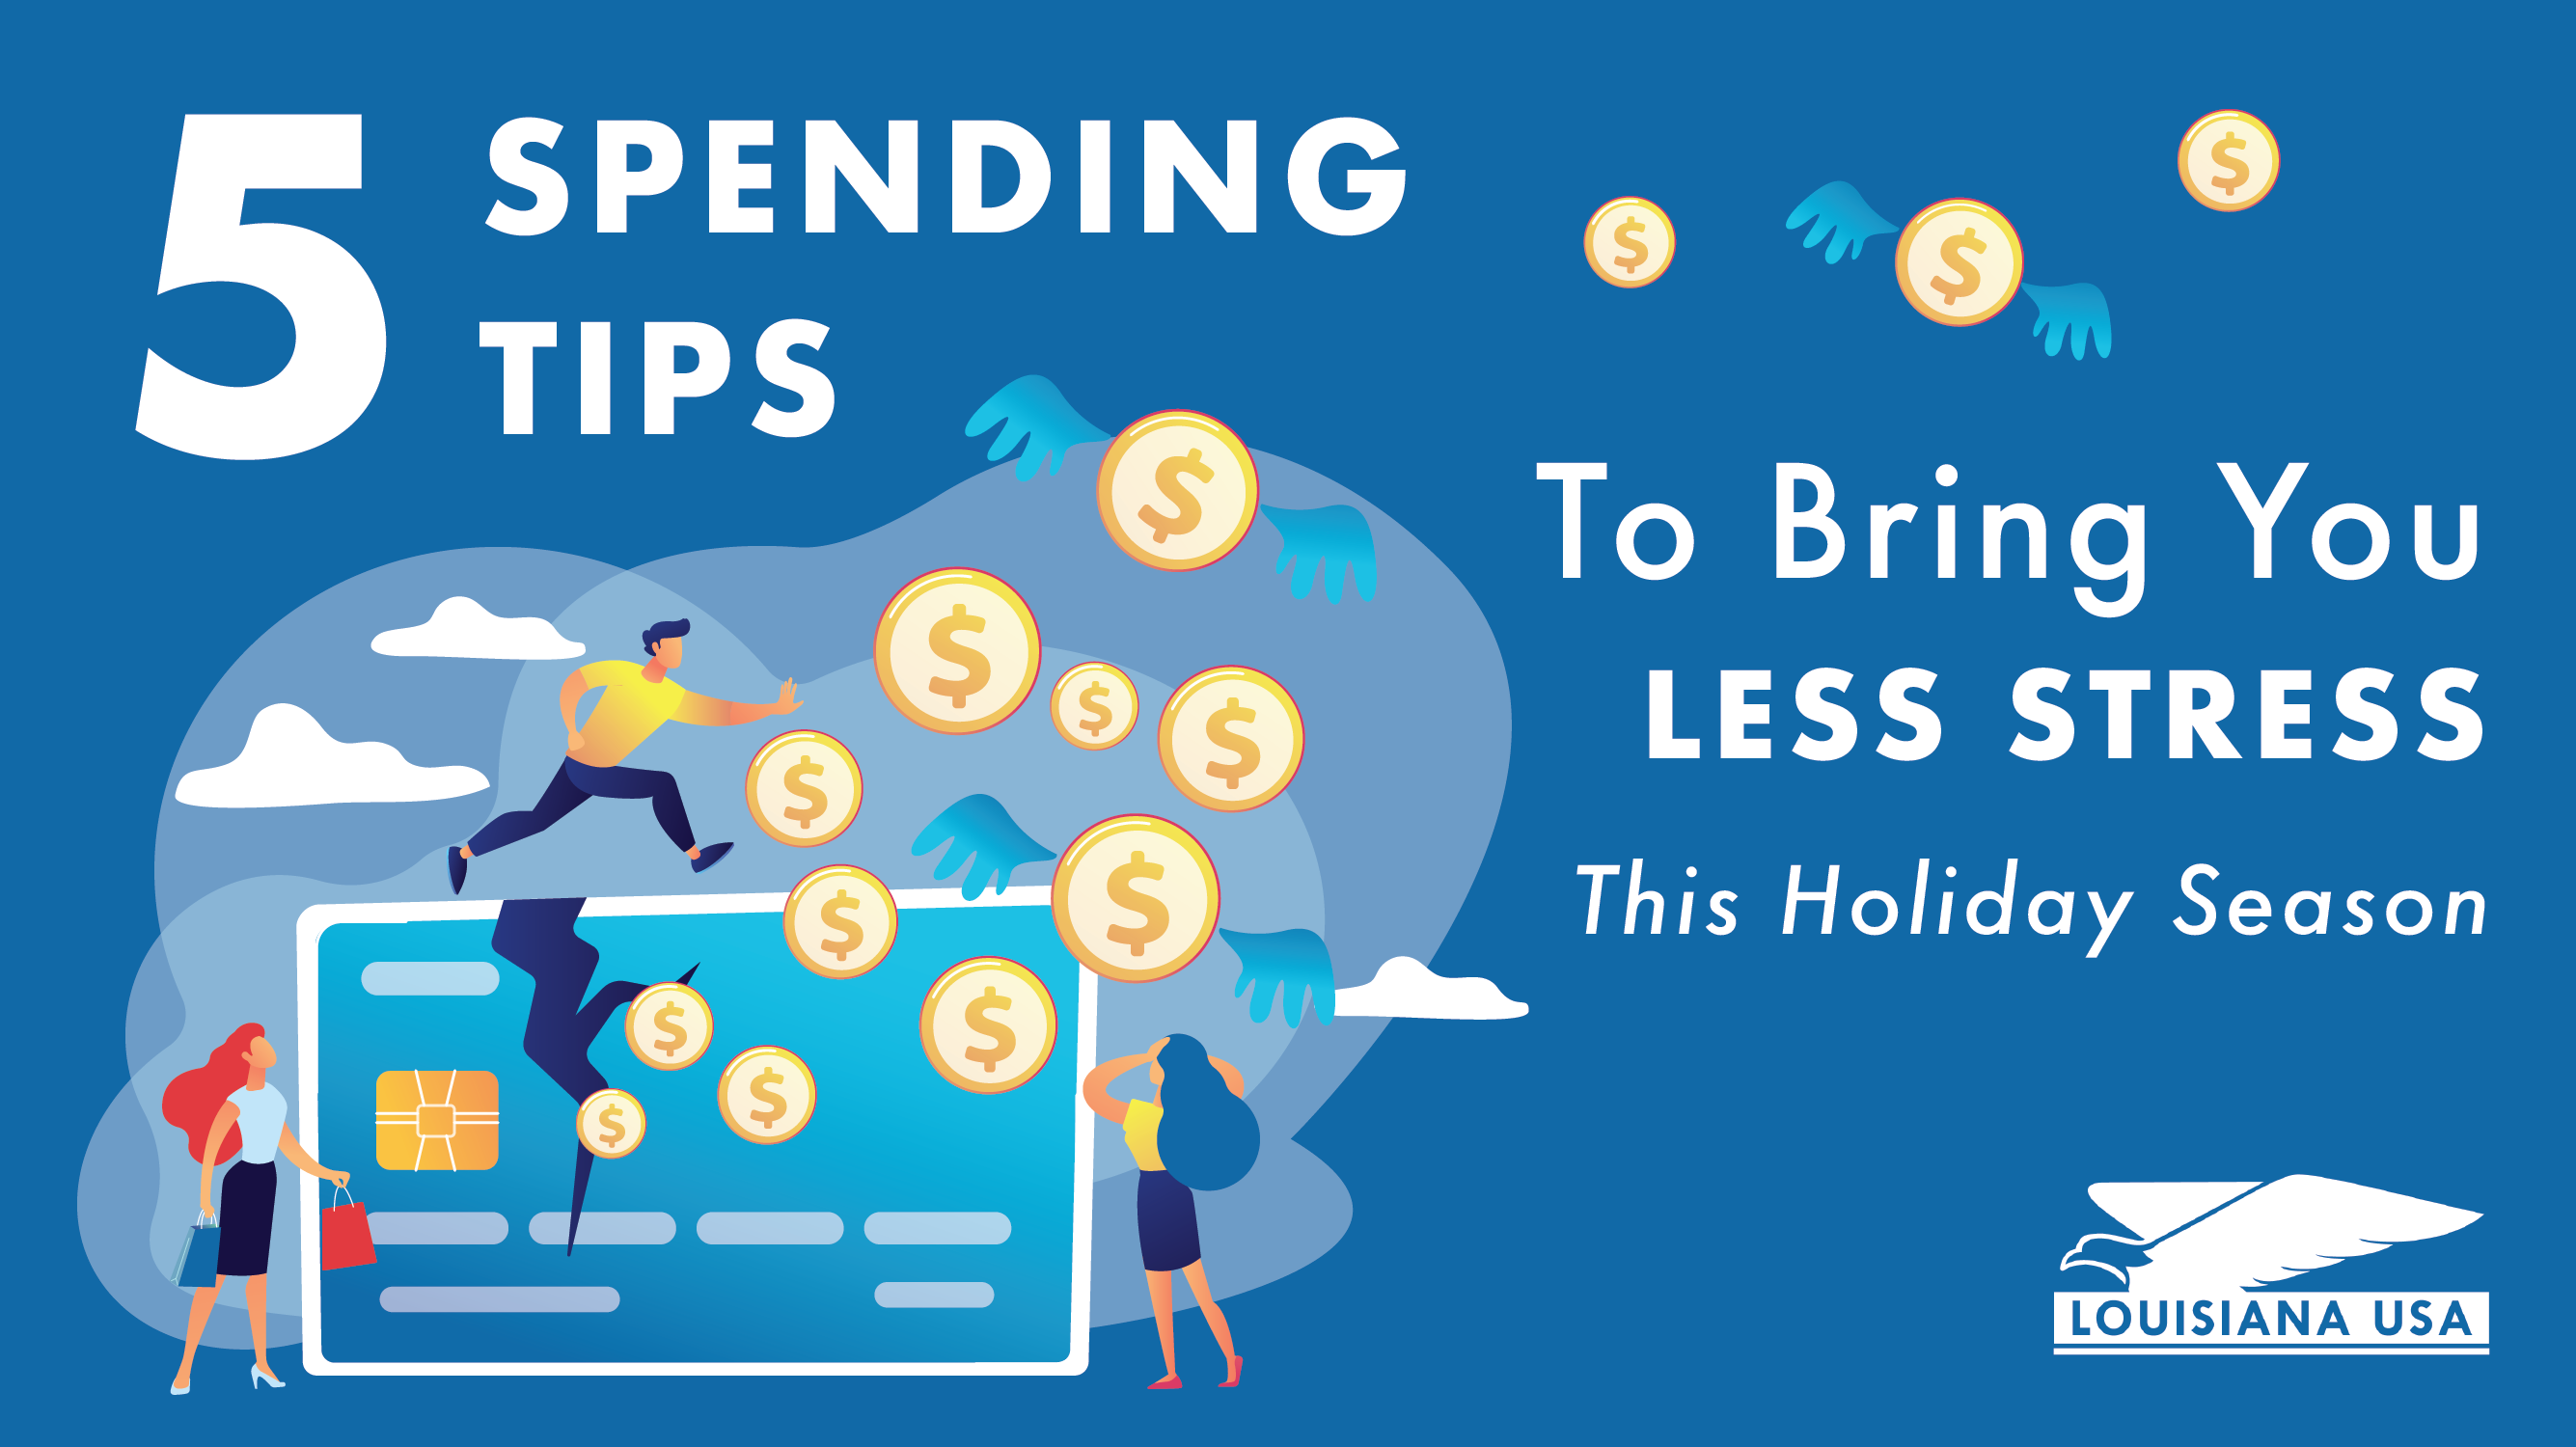 5 Holiday Spending Tips To Bring You Less Stress